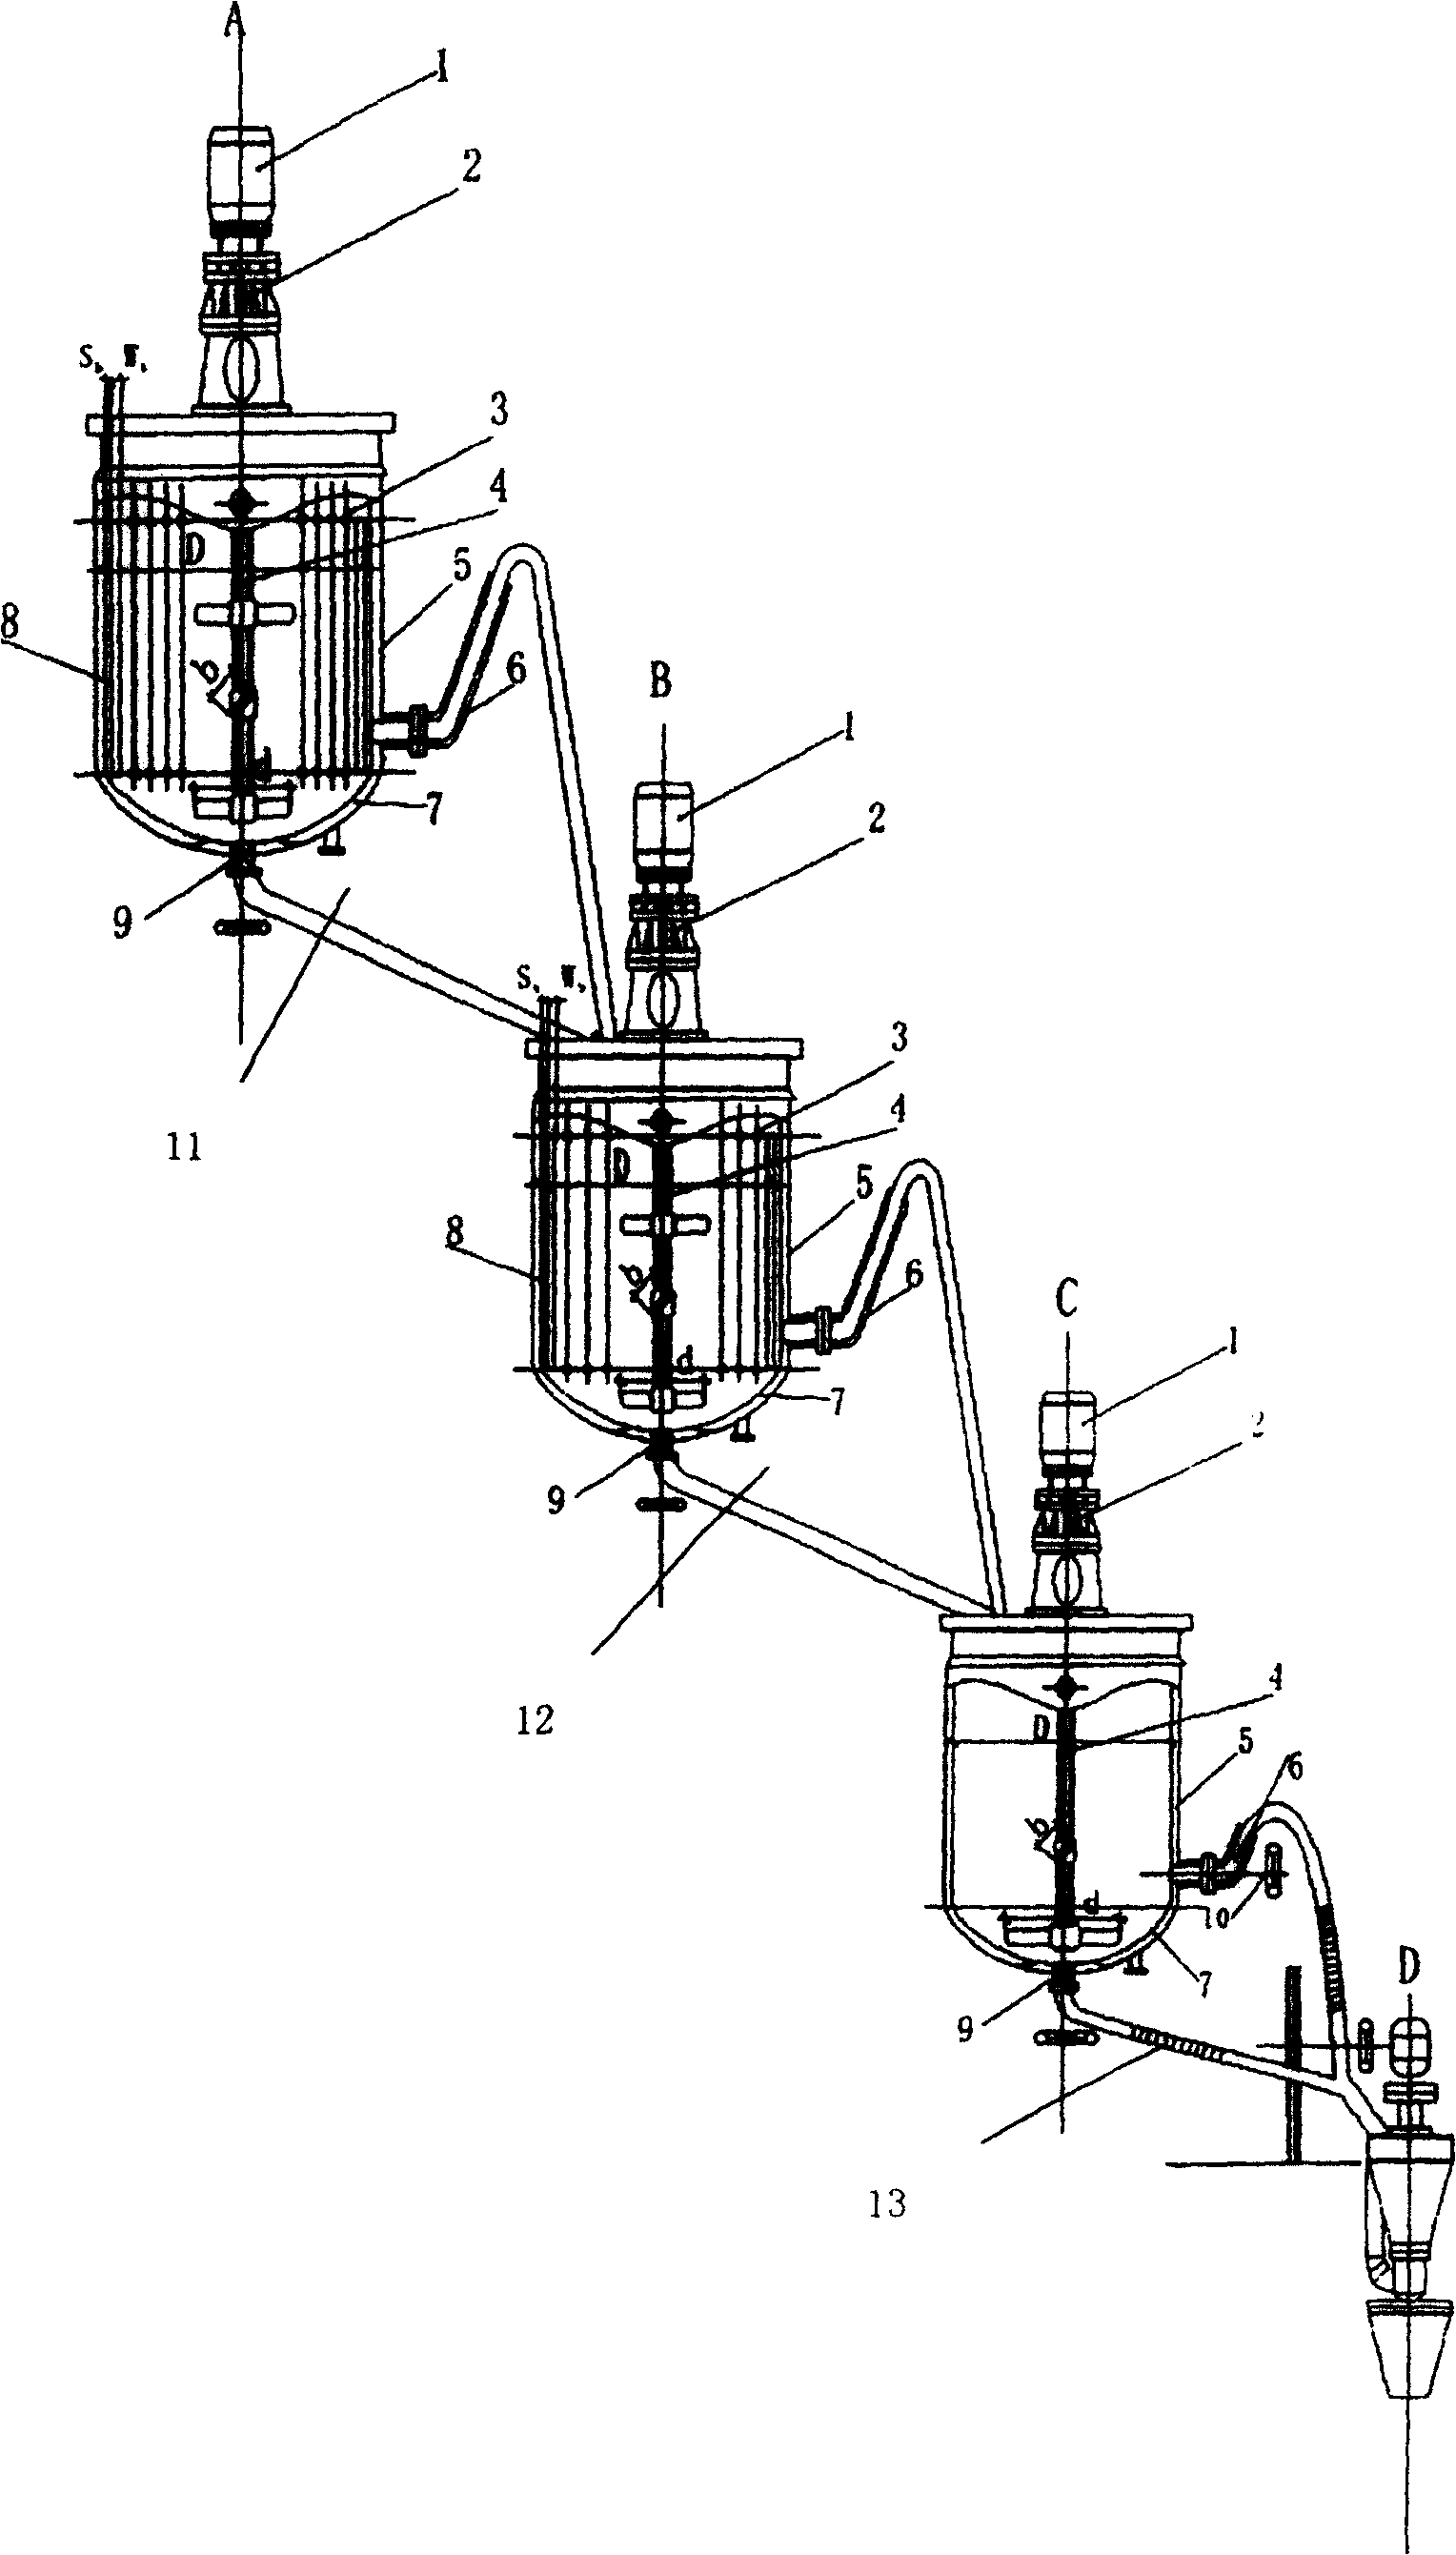 Pulp making device for producing compound fertilizer by high tower pelletizing